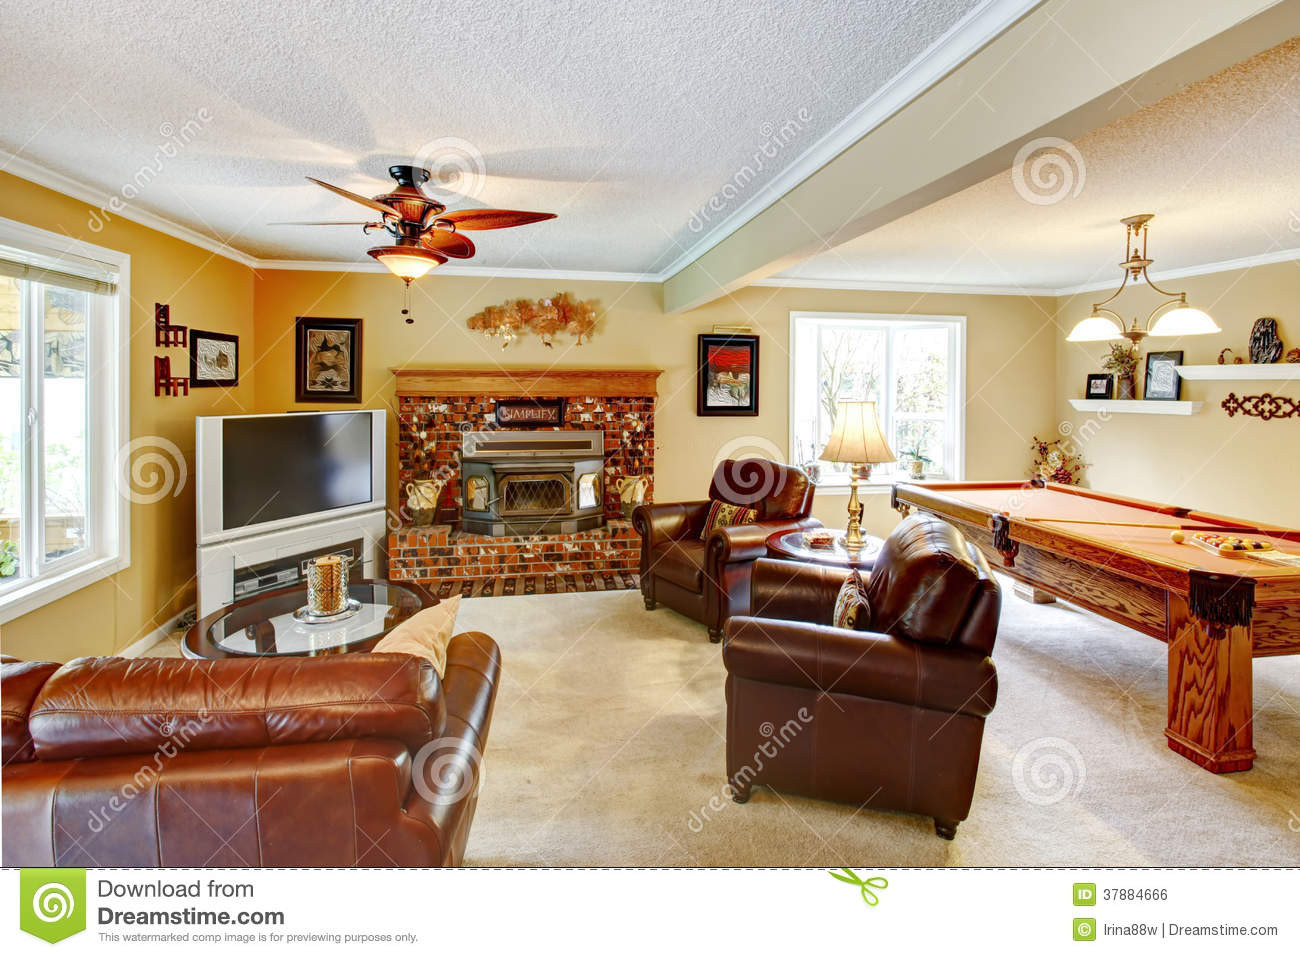 Pool Table In Living Room
 ELegant Living Room With Pool Table Stock Image of